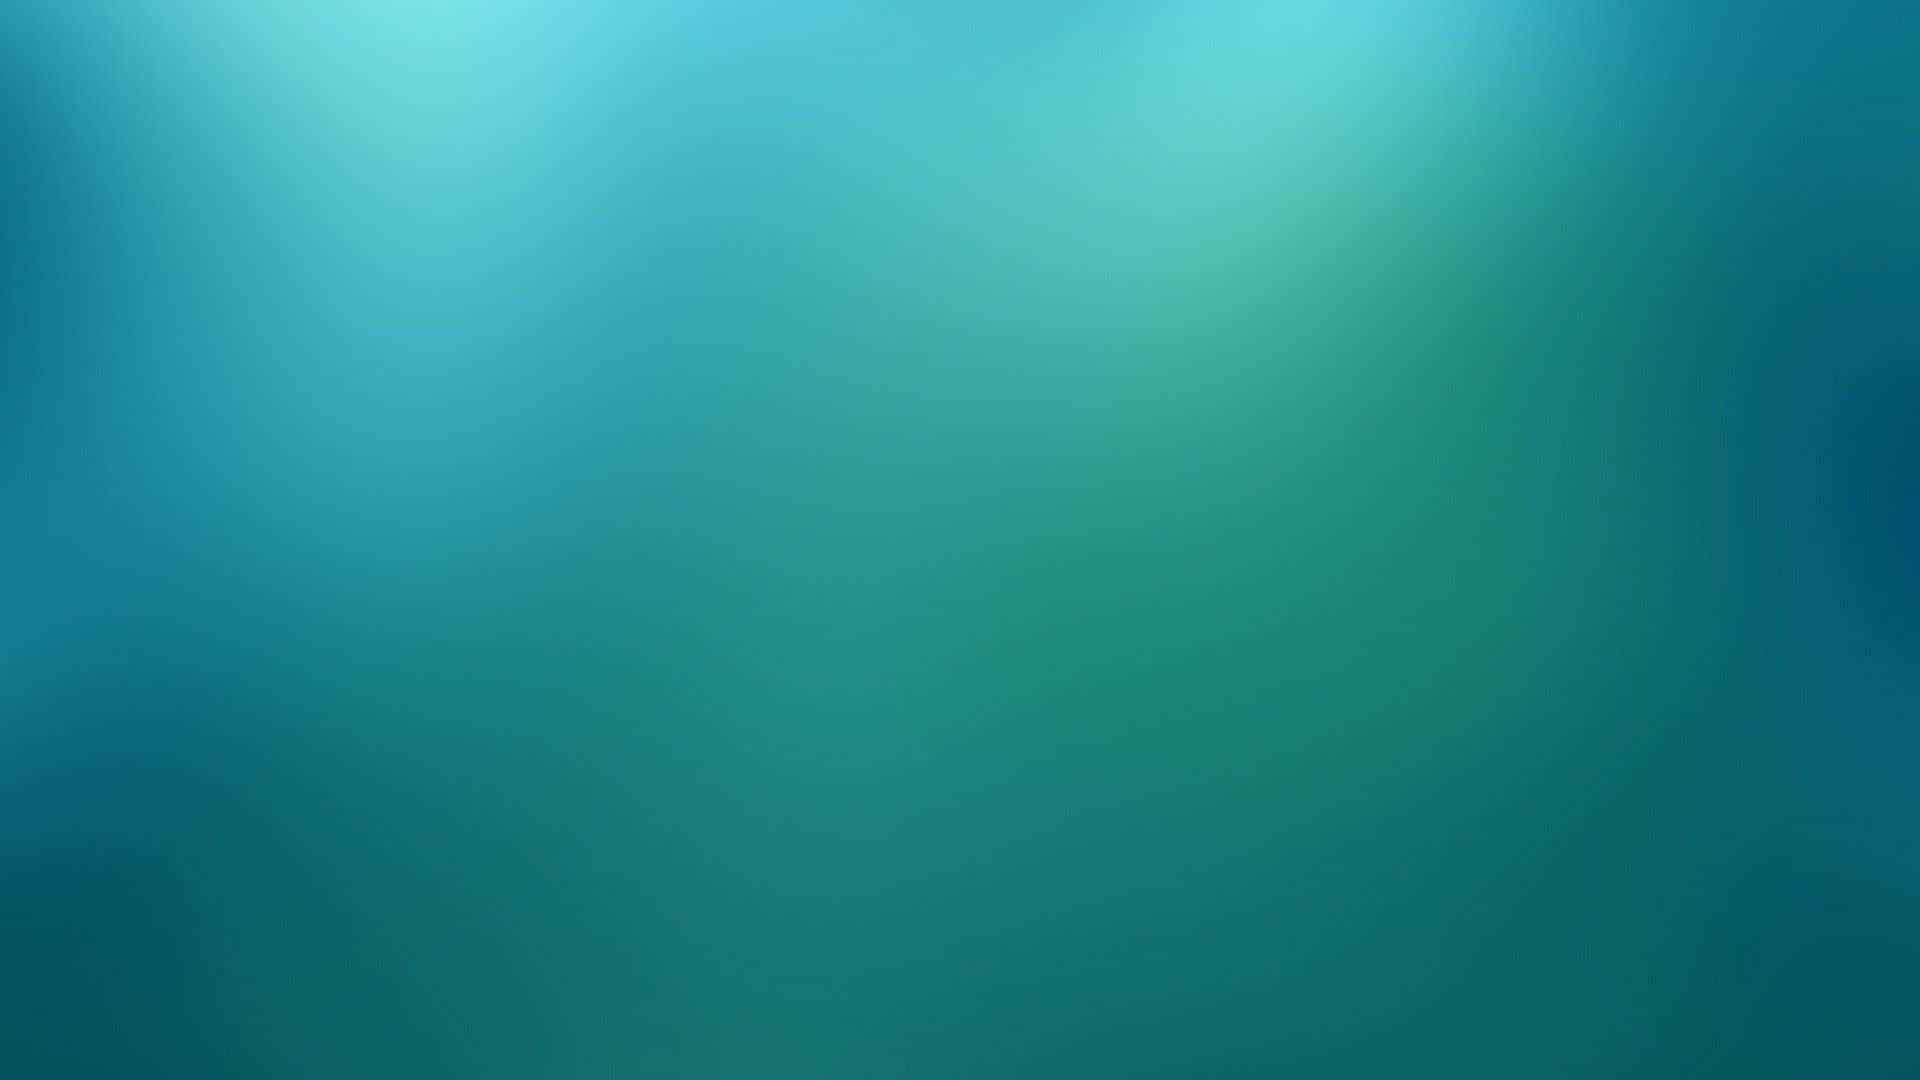 Download Emerald Green Background | Wallpapers.com